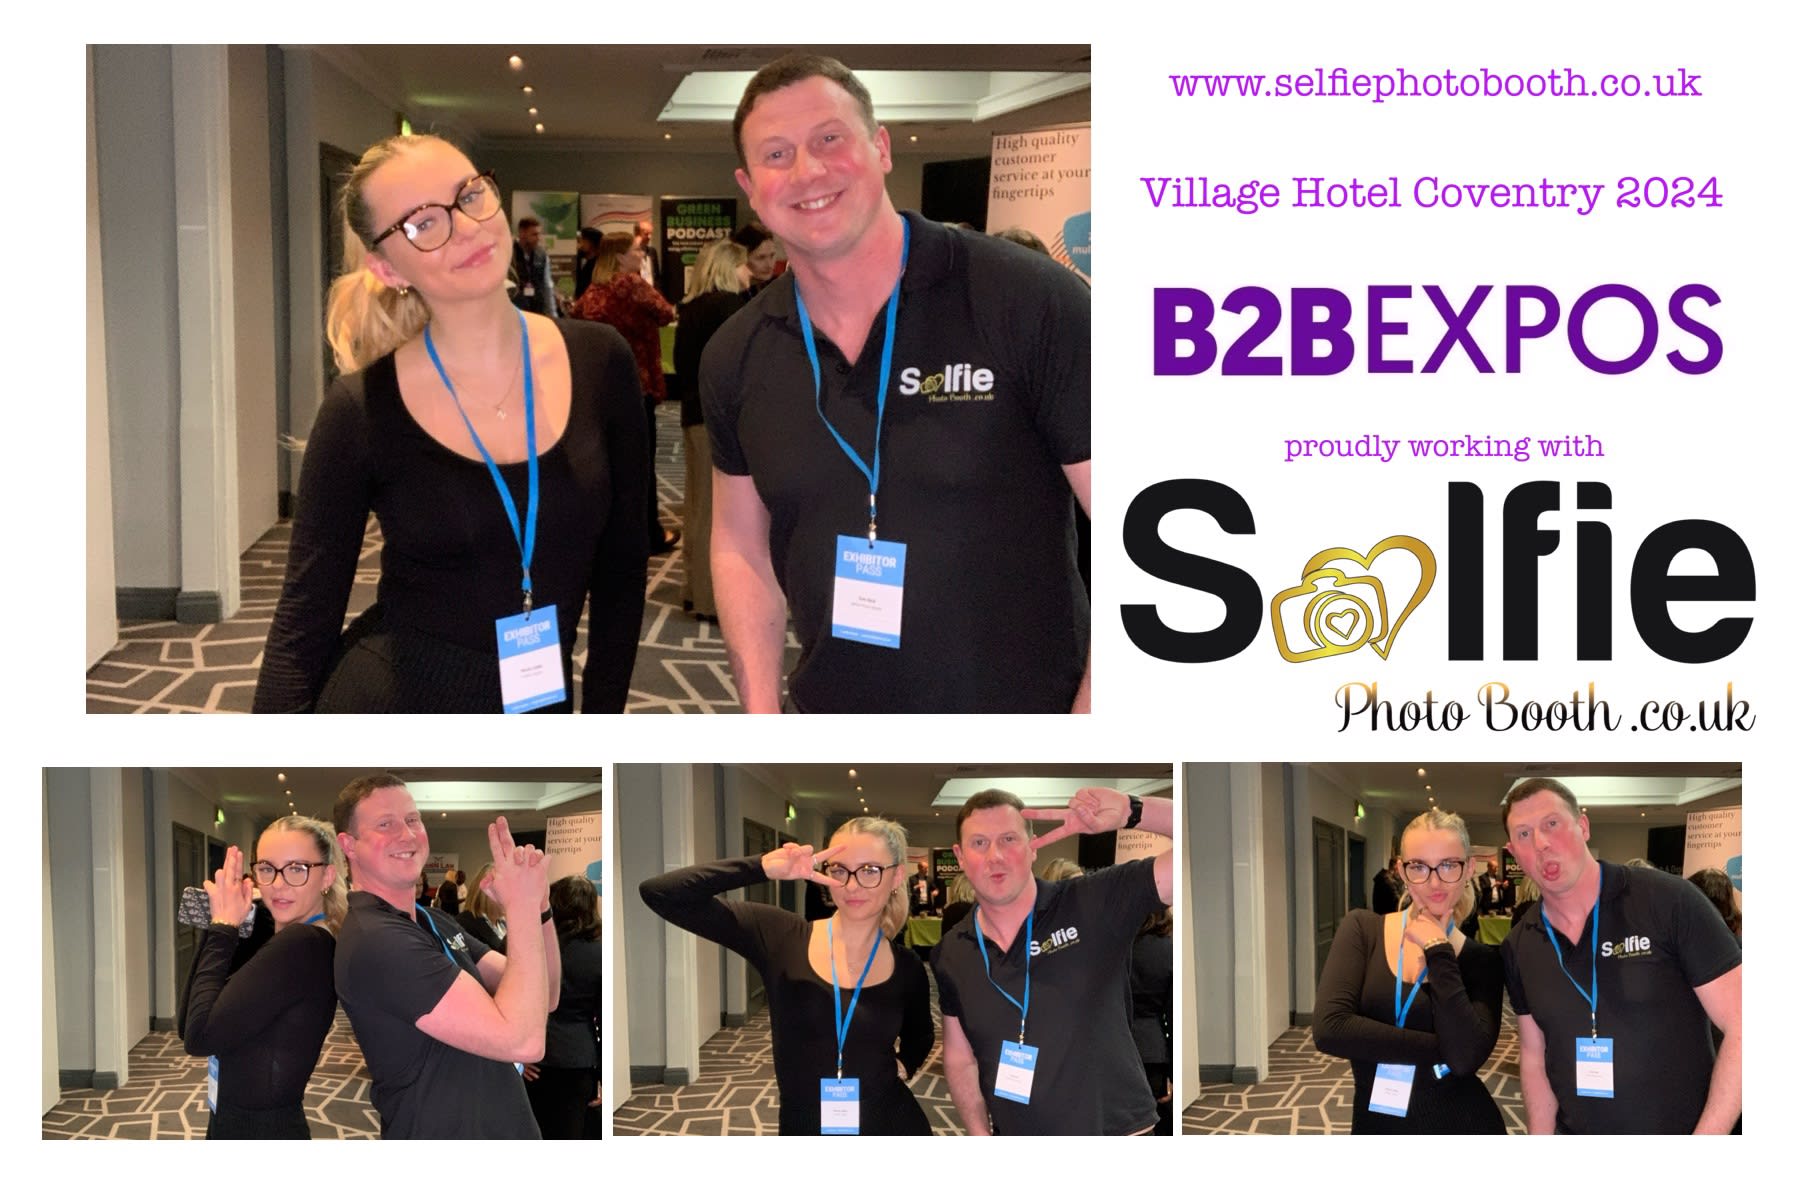 Selfie Photo Booth Coventry 07747 123455